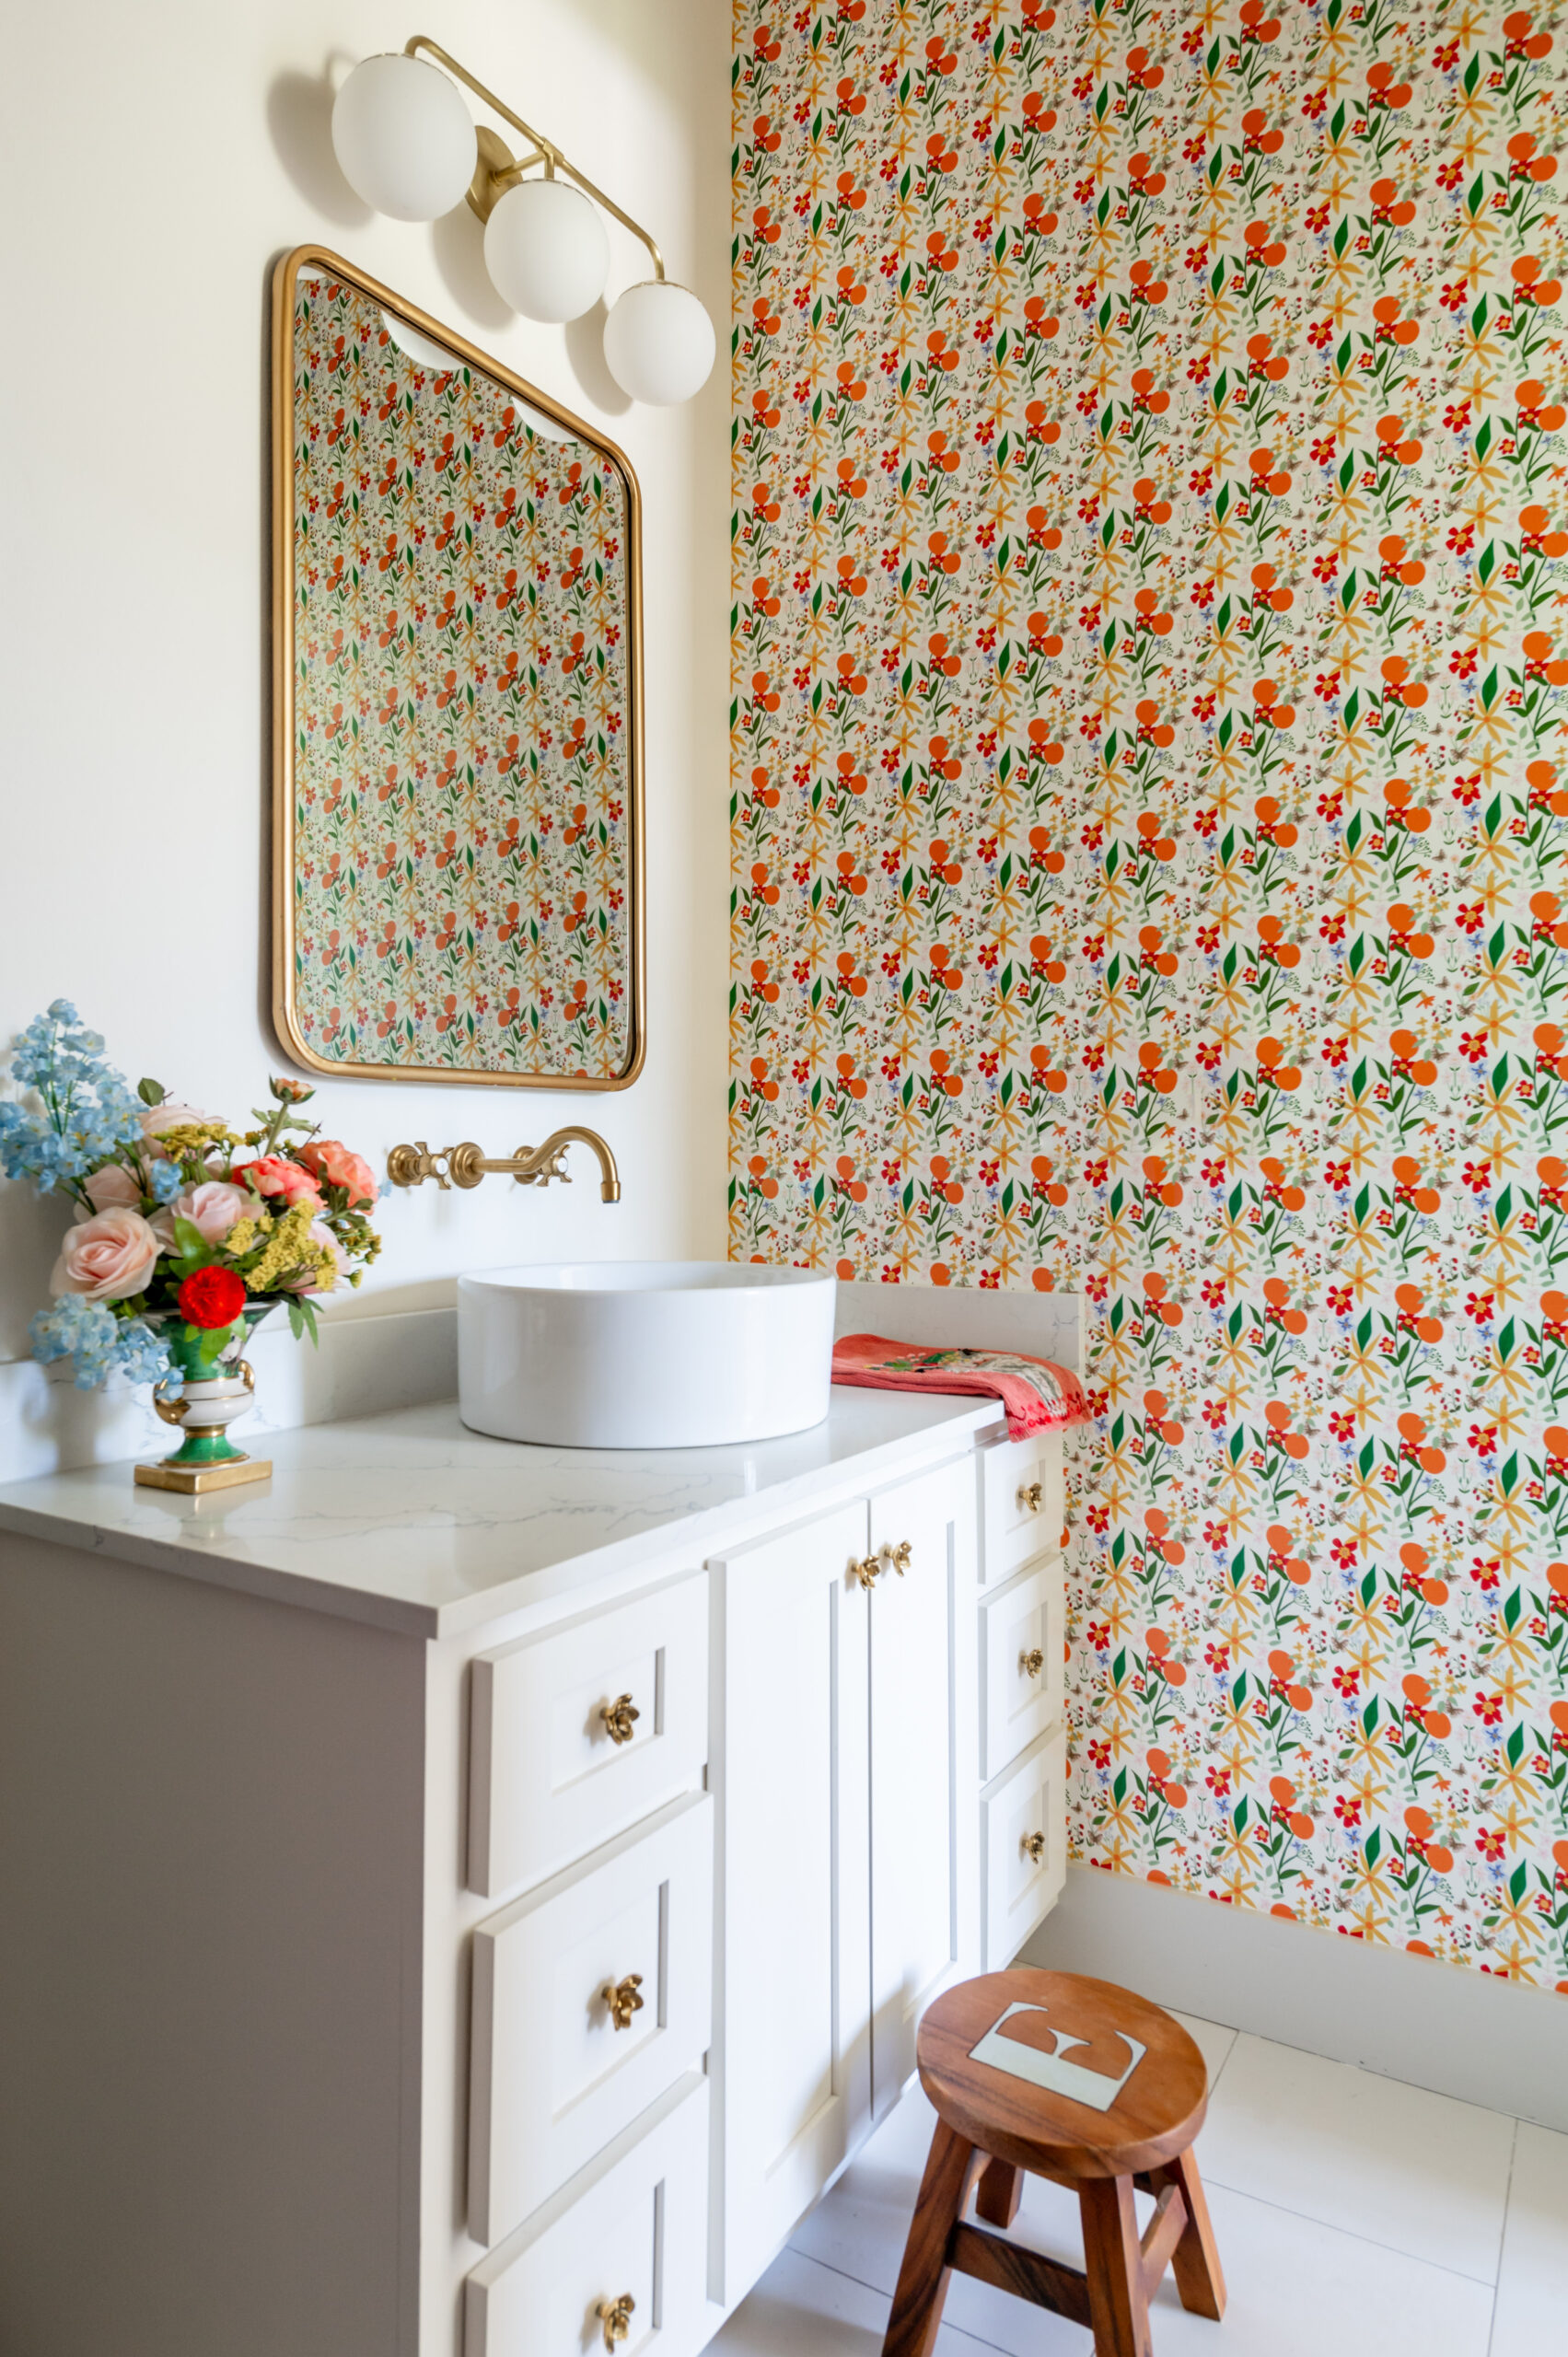 Texas Interior designer photography session with vibrant colors and personality-infused wallpapers